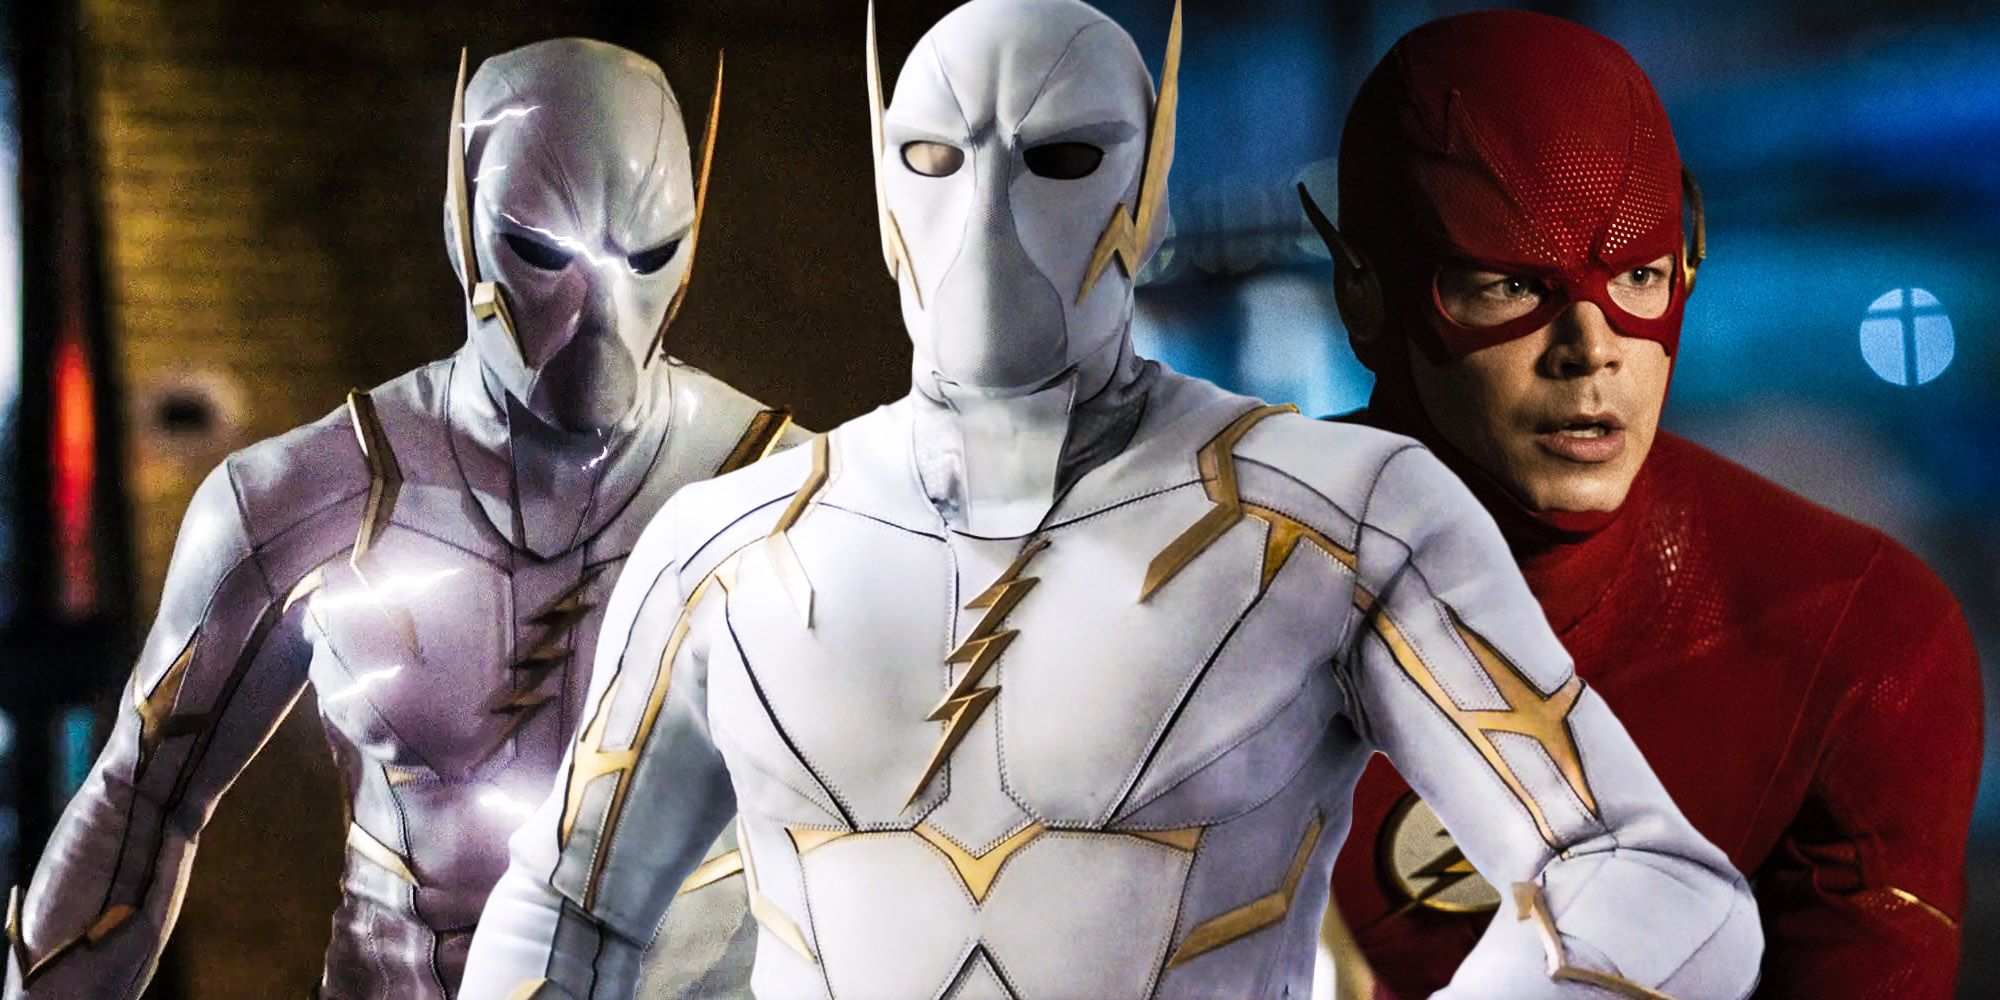 Why The Flashs 150th Episode Is Much Better Than Its 100th